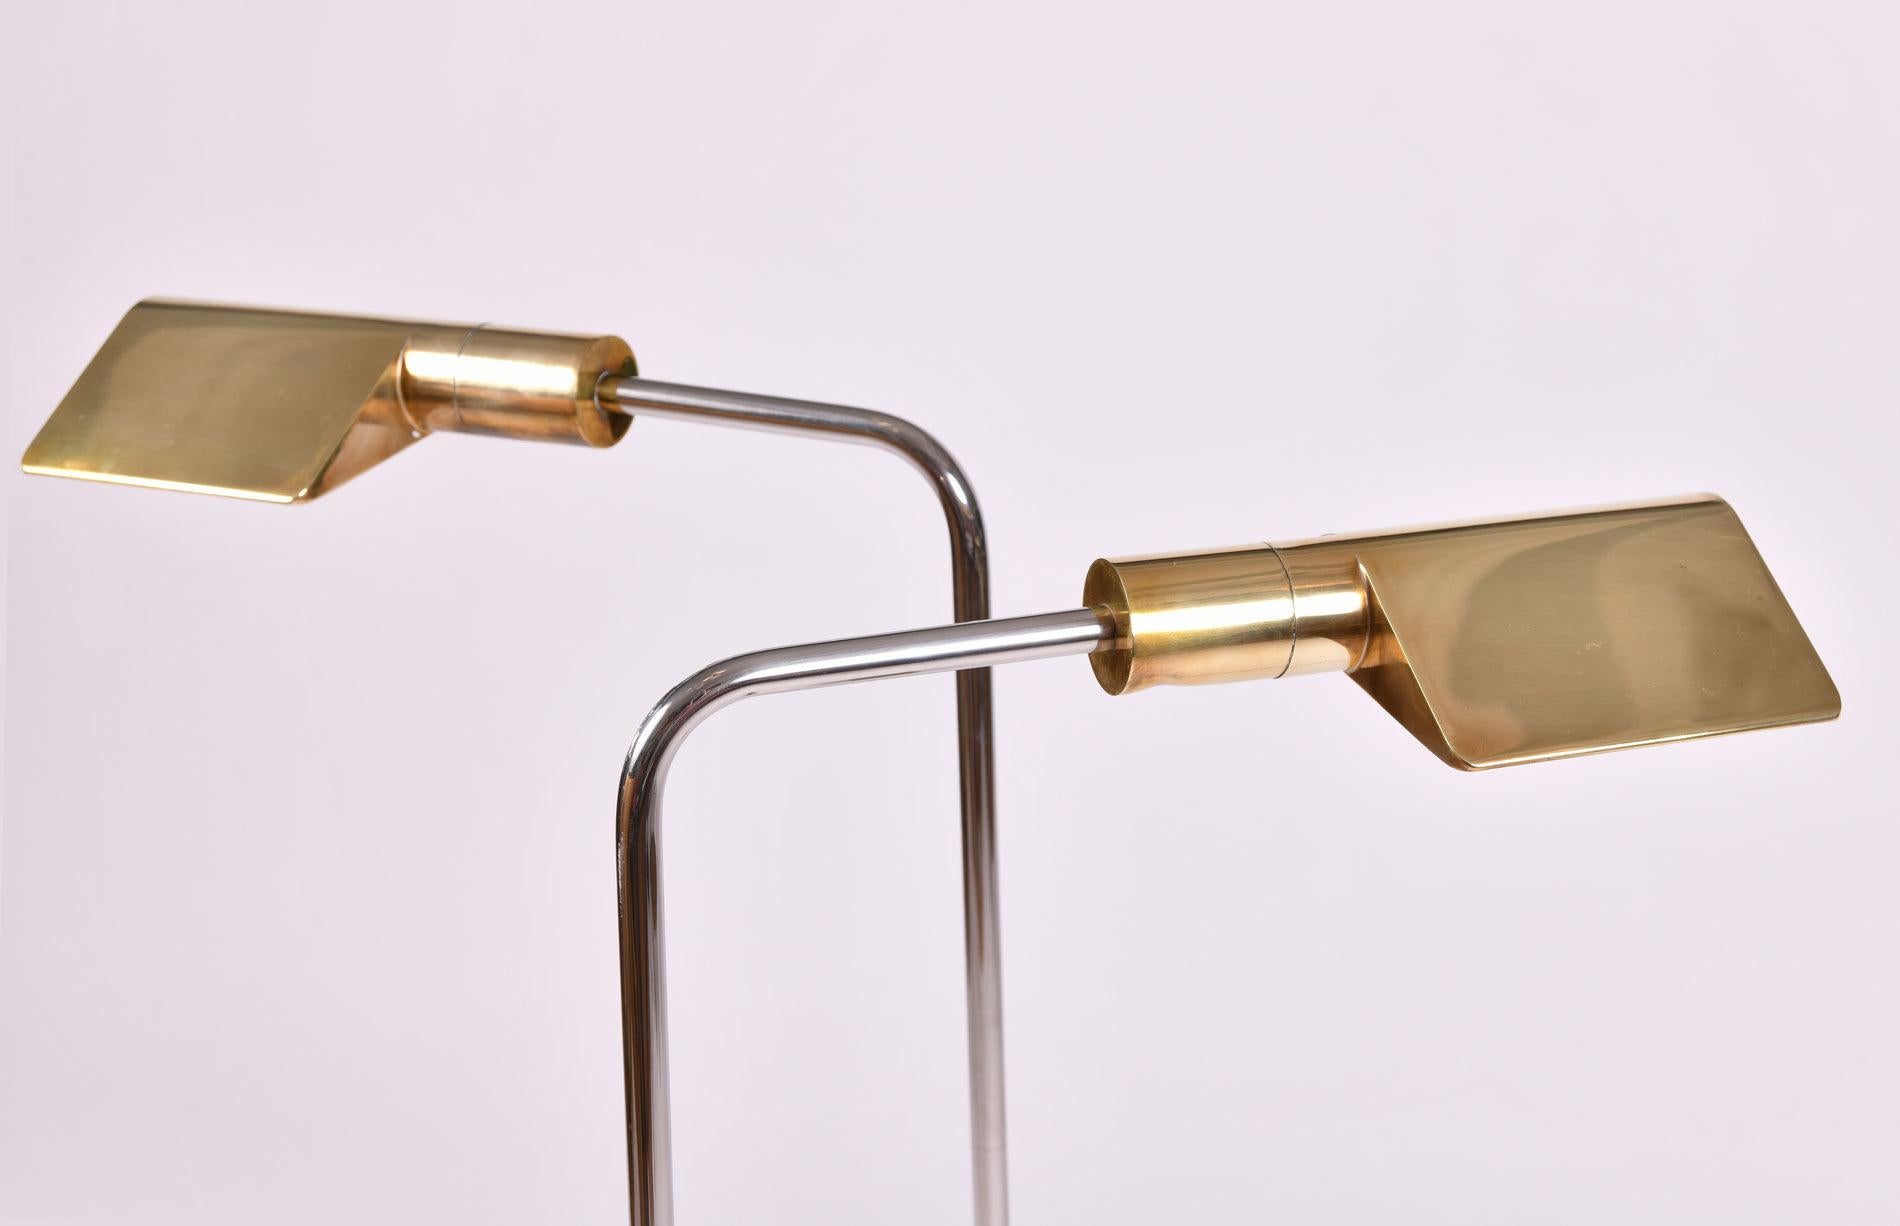 Sleek pair of floor lamps featuring a brass shade and base with polished chrome arm. Lamps are adjustable in height with swivel shades. Classic design by US designer Cedric Hartman, signed and stamped beneath base (see detailed image).